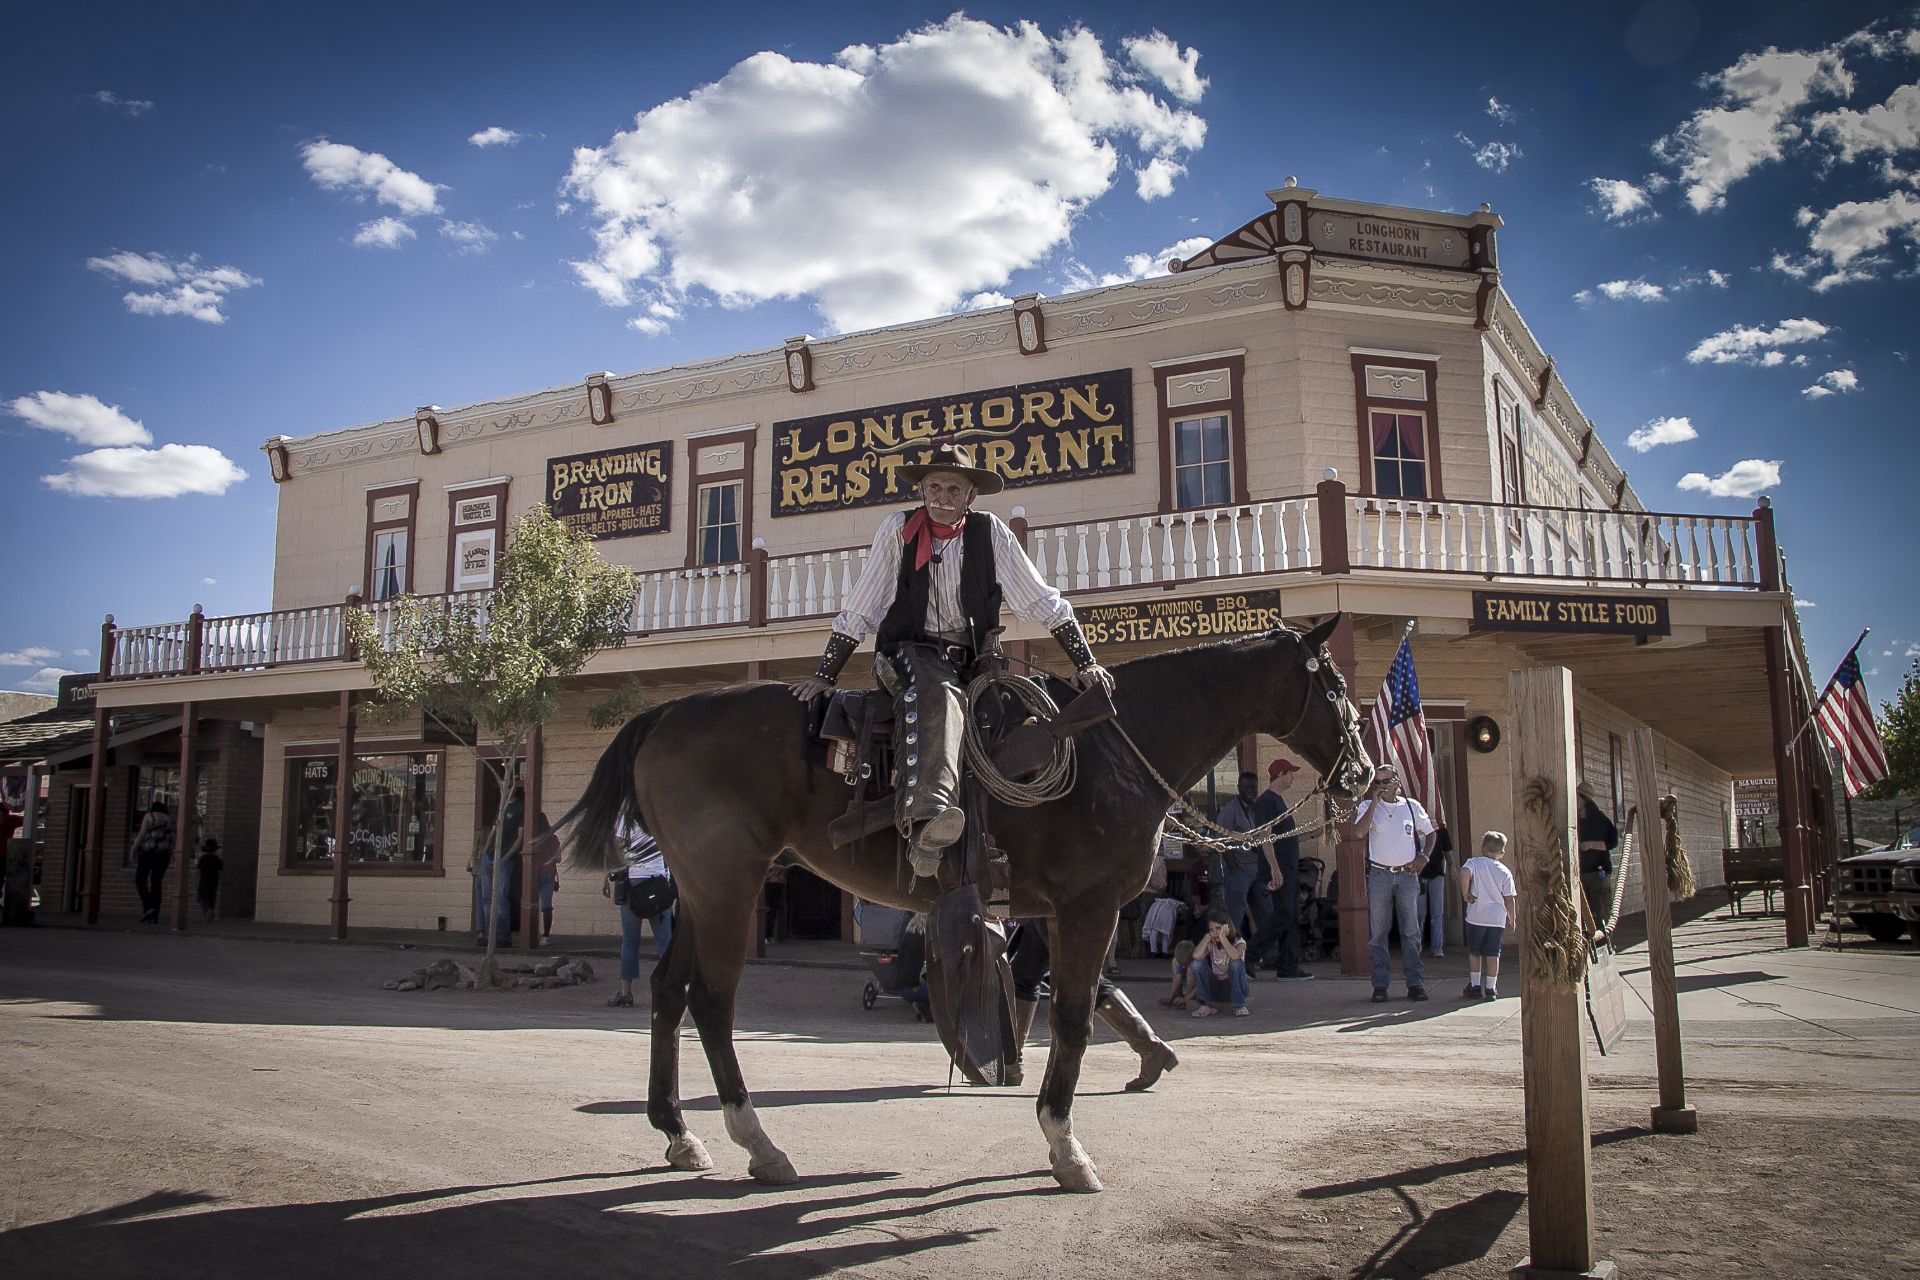 Wake Up to Beauty and Small-Town Charm in Cochise County, Arizona!